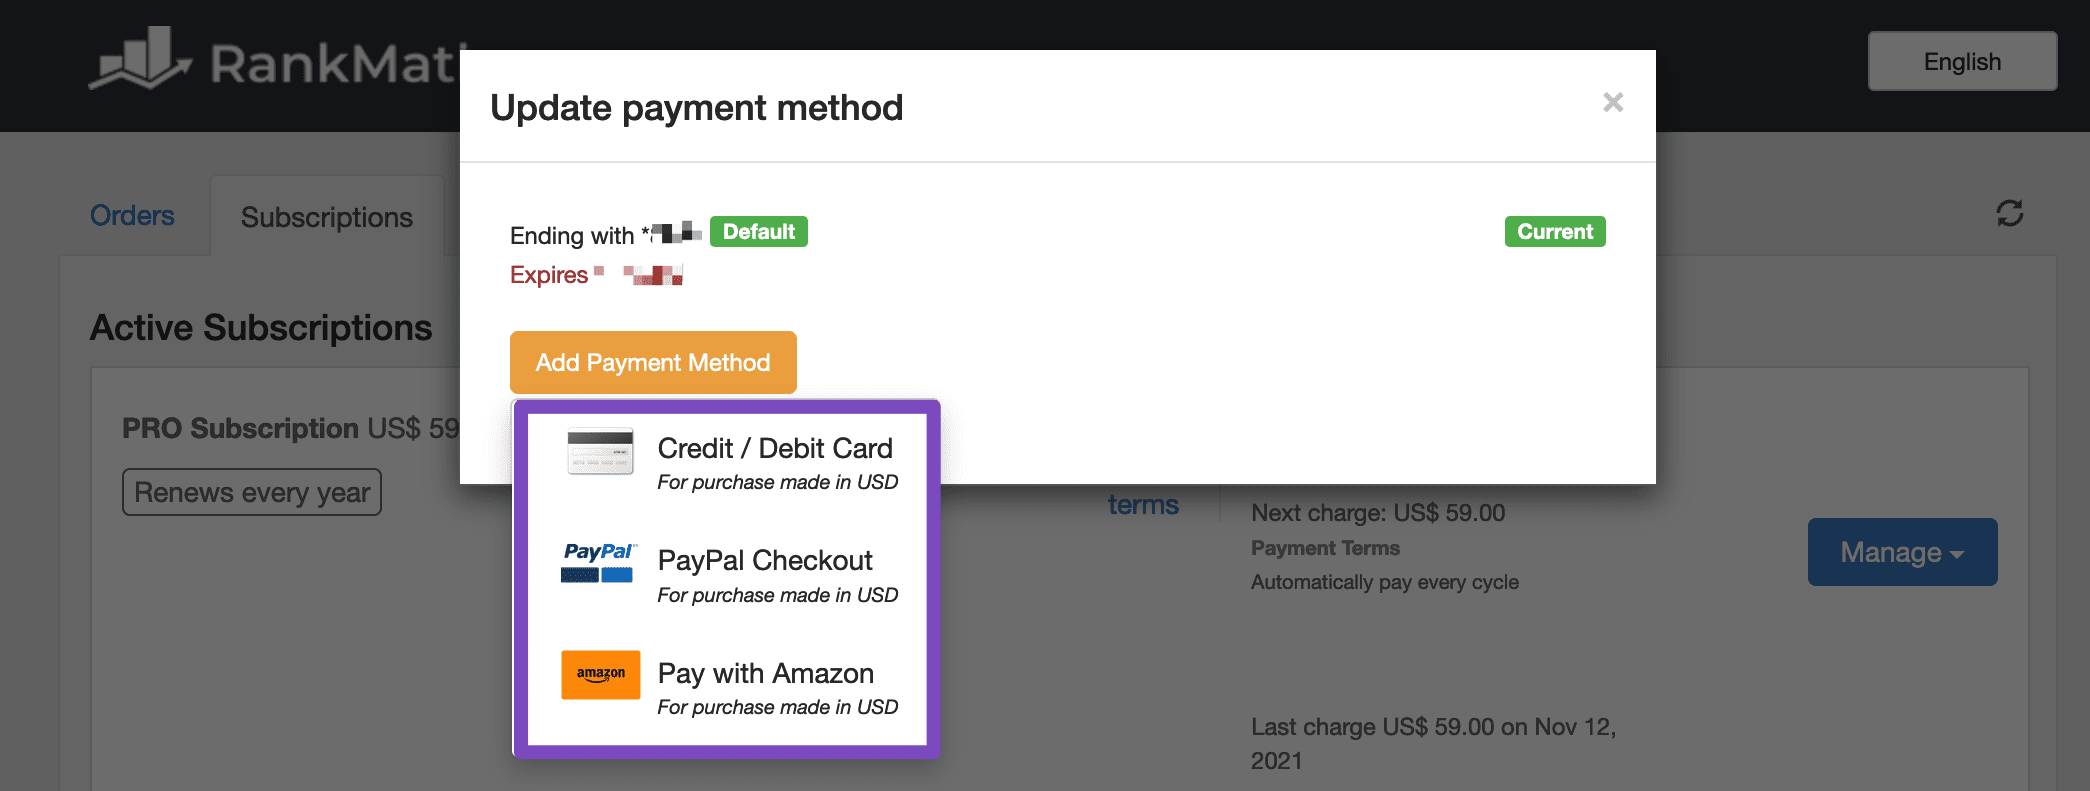 Choose a payment method from the drop-down